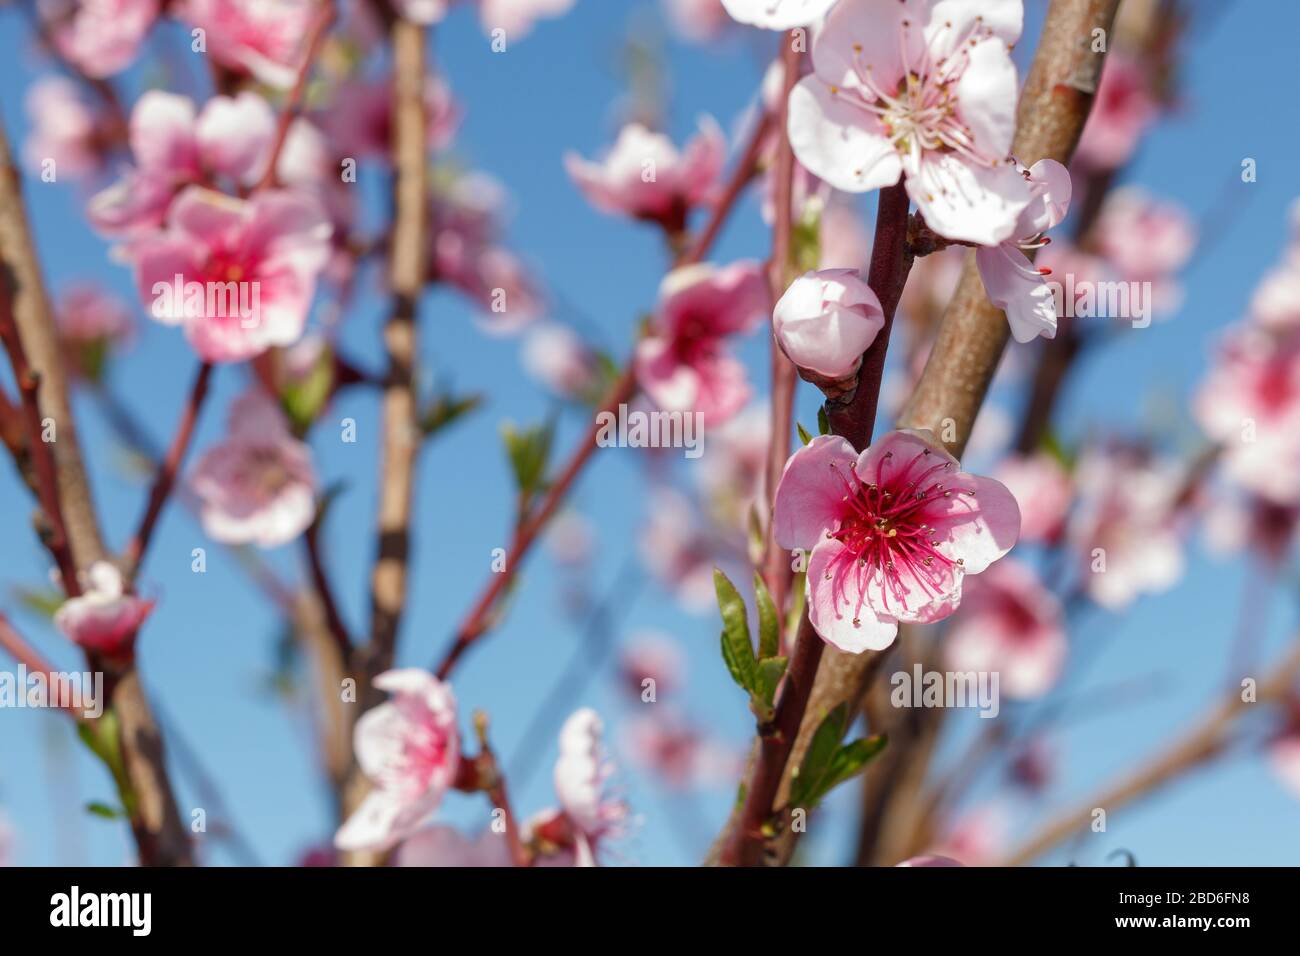 Close Up Pink Flowers Spring Blossom Stock Photo